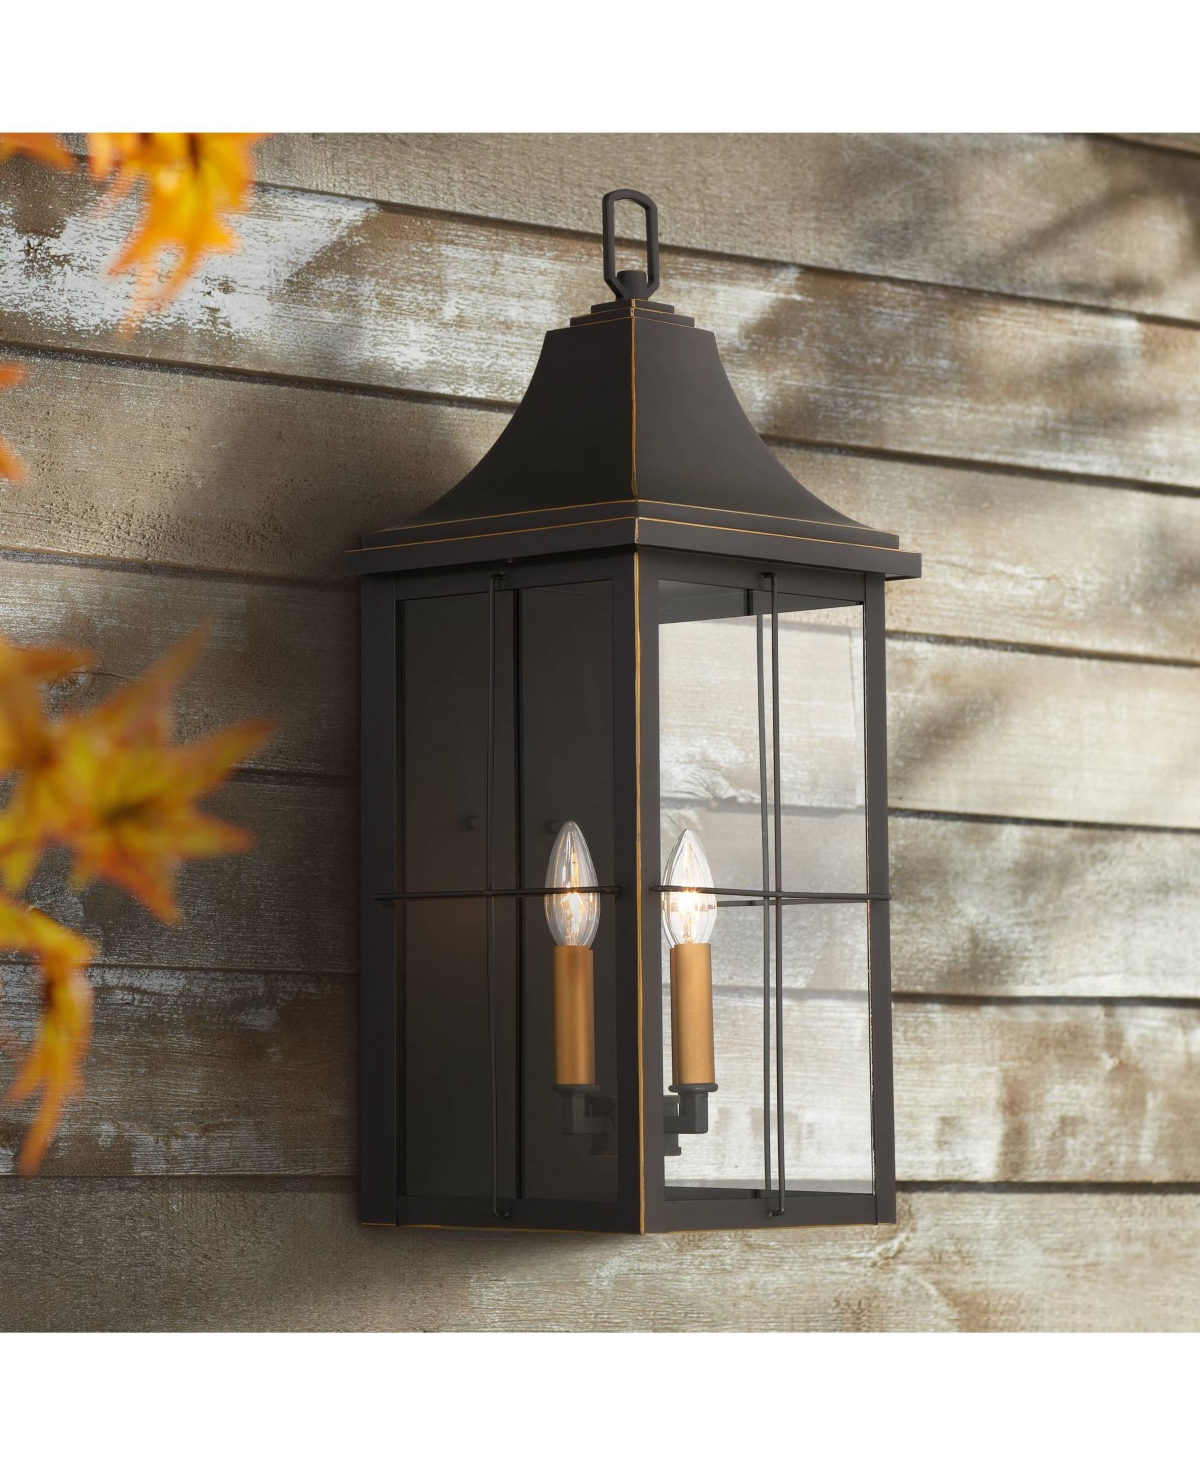 Sunderland Rustic Industrial Outdoor Wall Light Fixture Black Warm Gold 4-Light 24 3/4" Clear Glass for Exterior House Porch Patio Outside Deck Garage